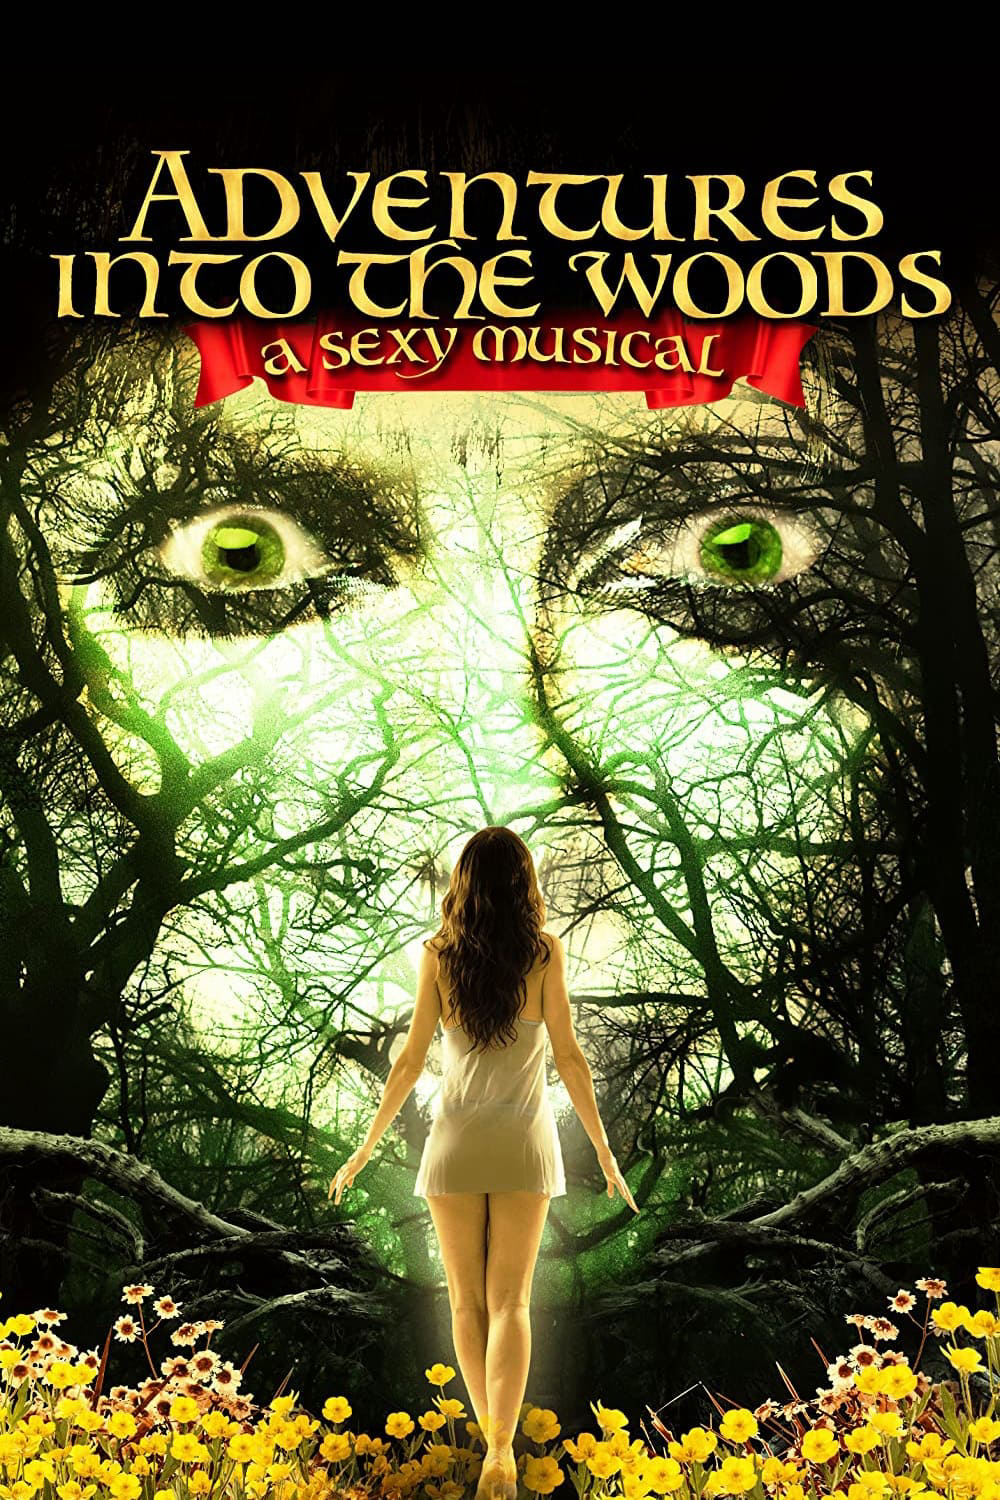 Adventures Into the Woods: A Sexy Musical (Adventures Into the Woods: A Sexy Musical) [2012]